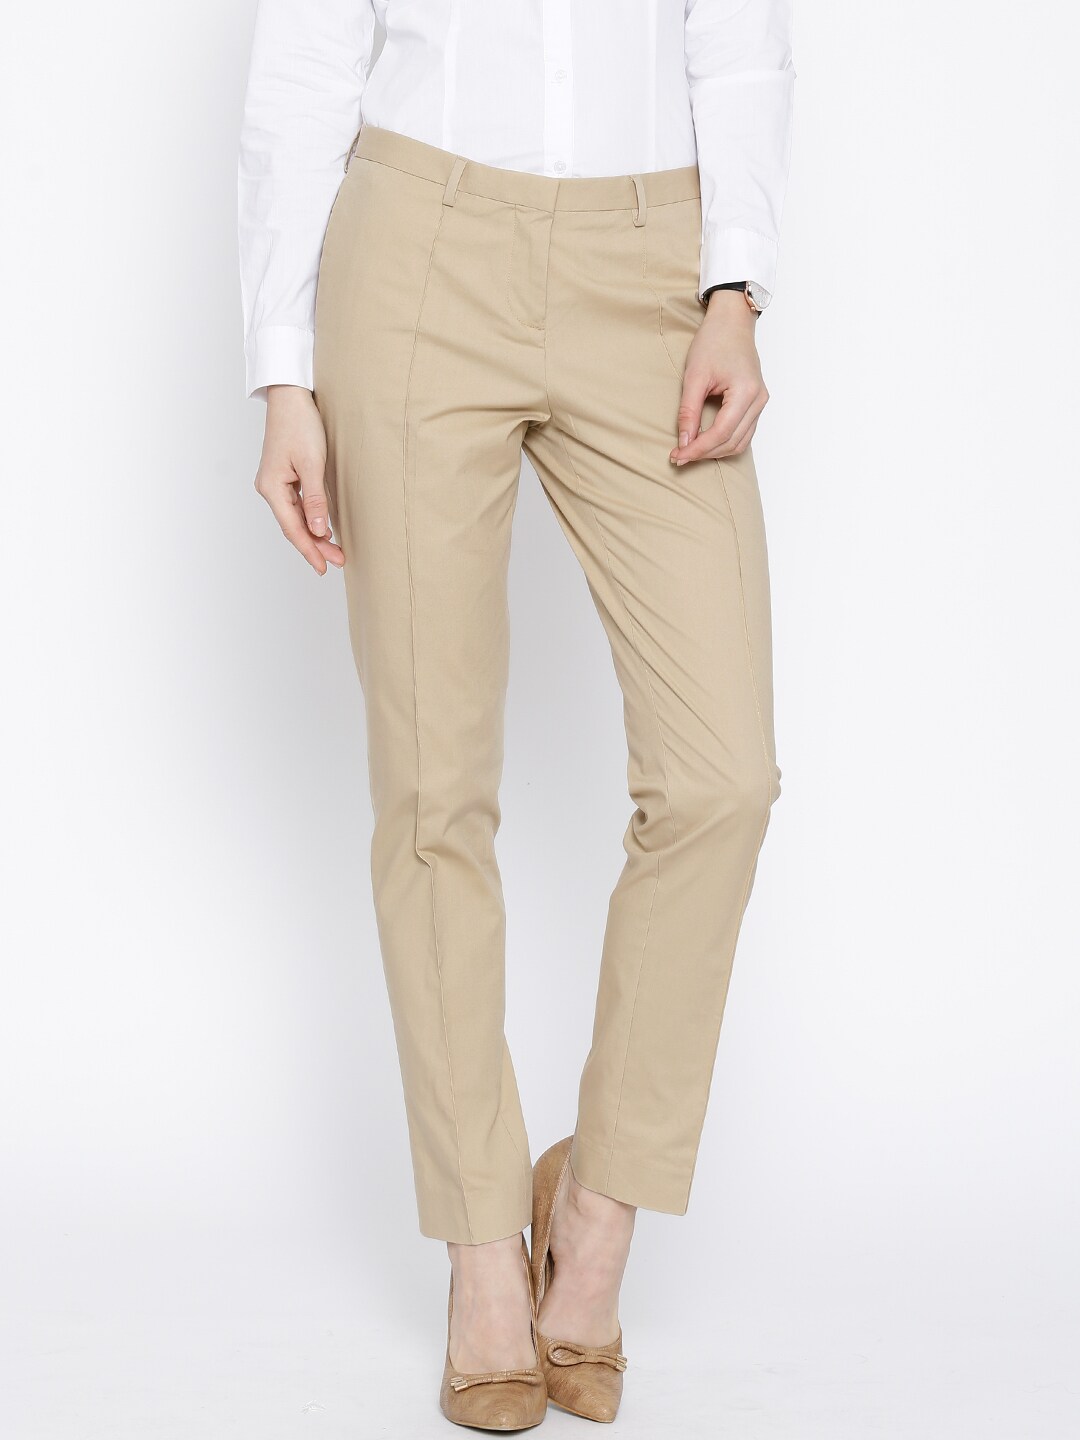 Wills Lifestyle Grey Self Design Slim Fit Formal Trouser for men price   Best buy price in India August 2023 detail  trends  PriceHunt